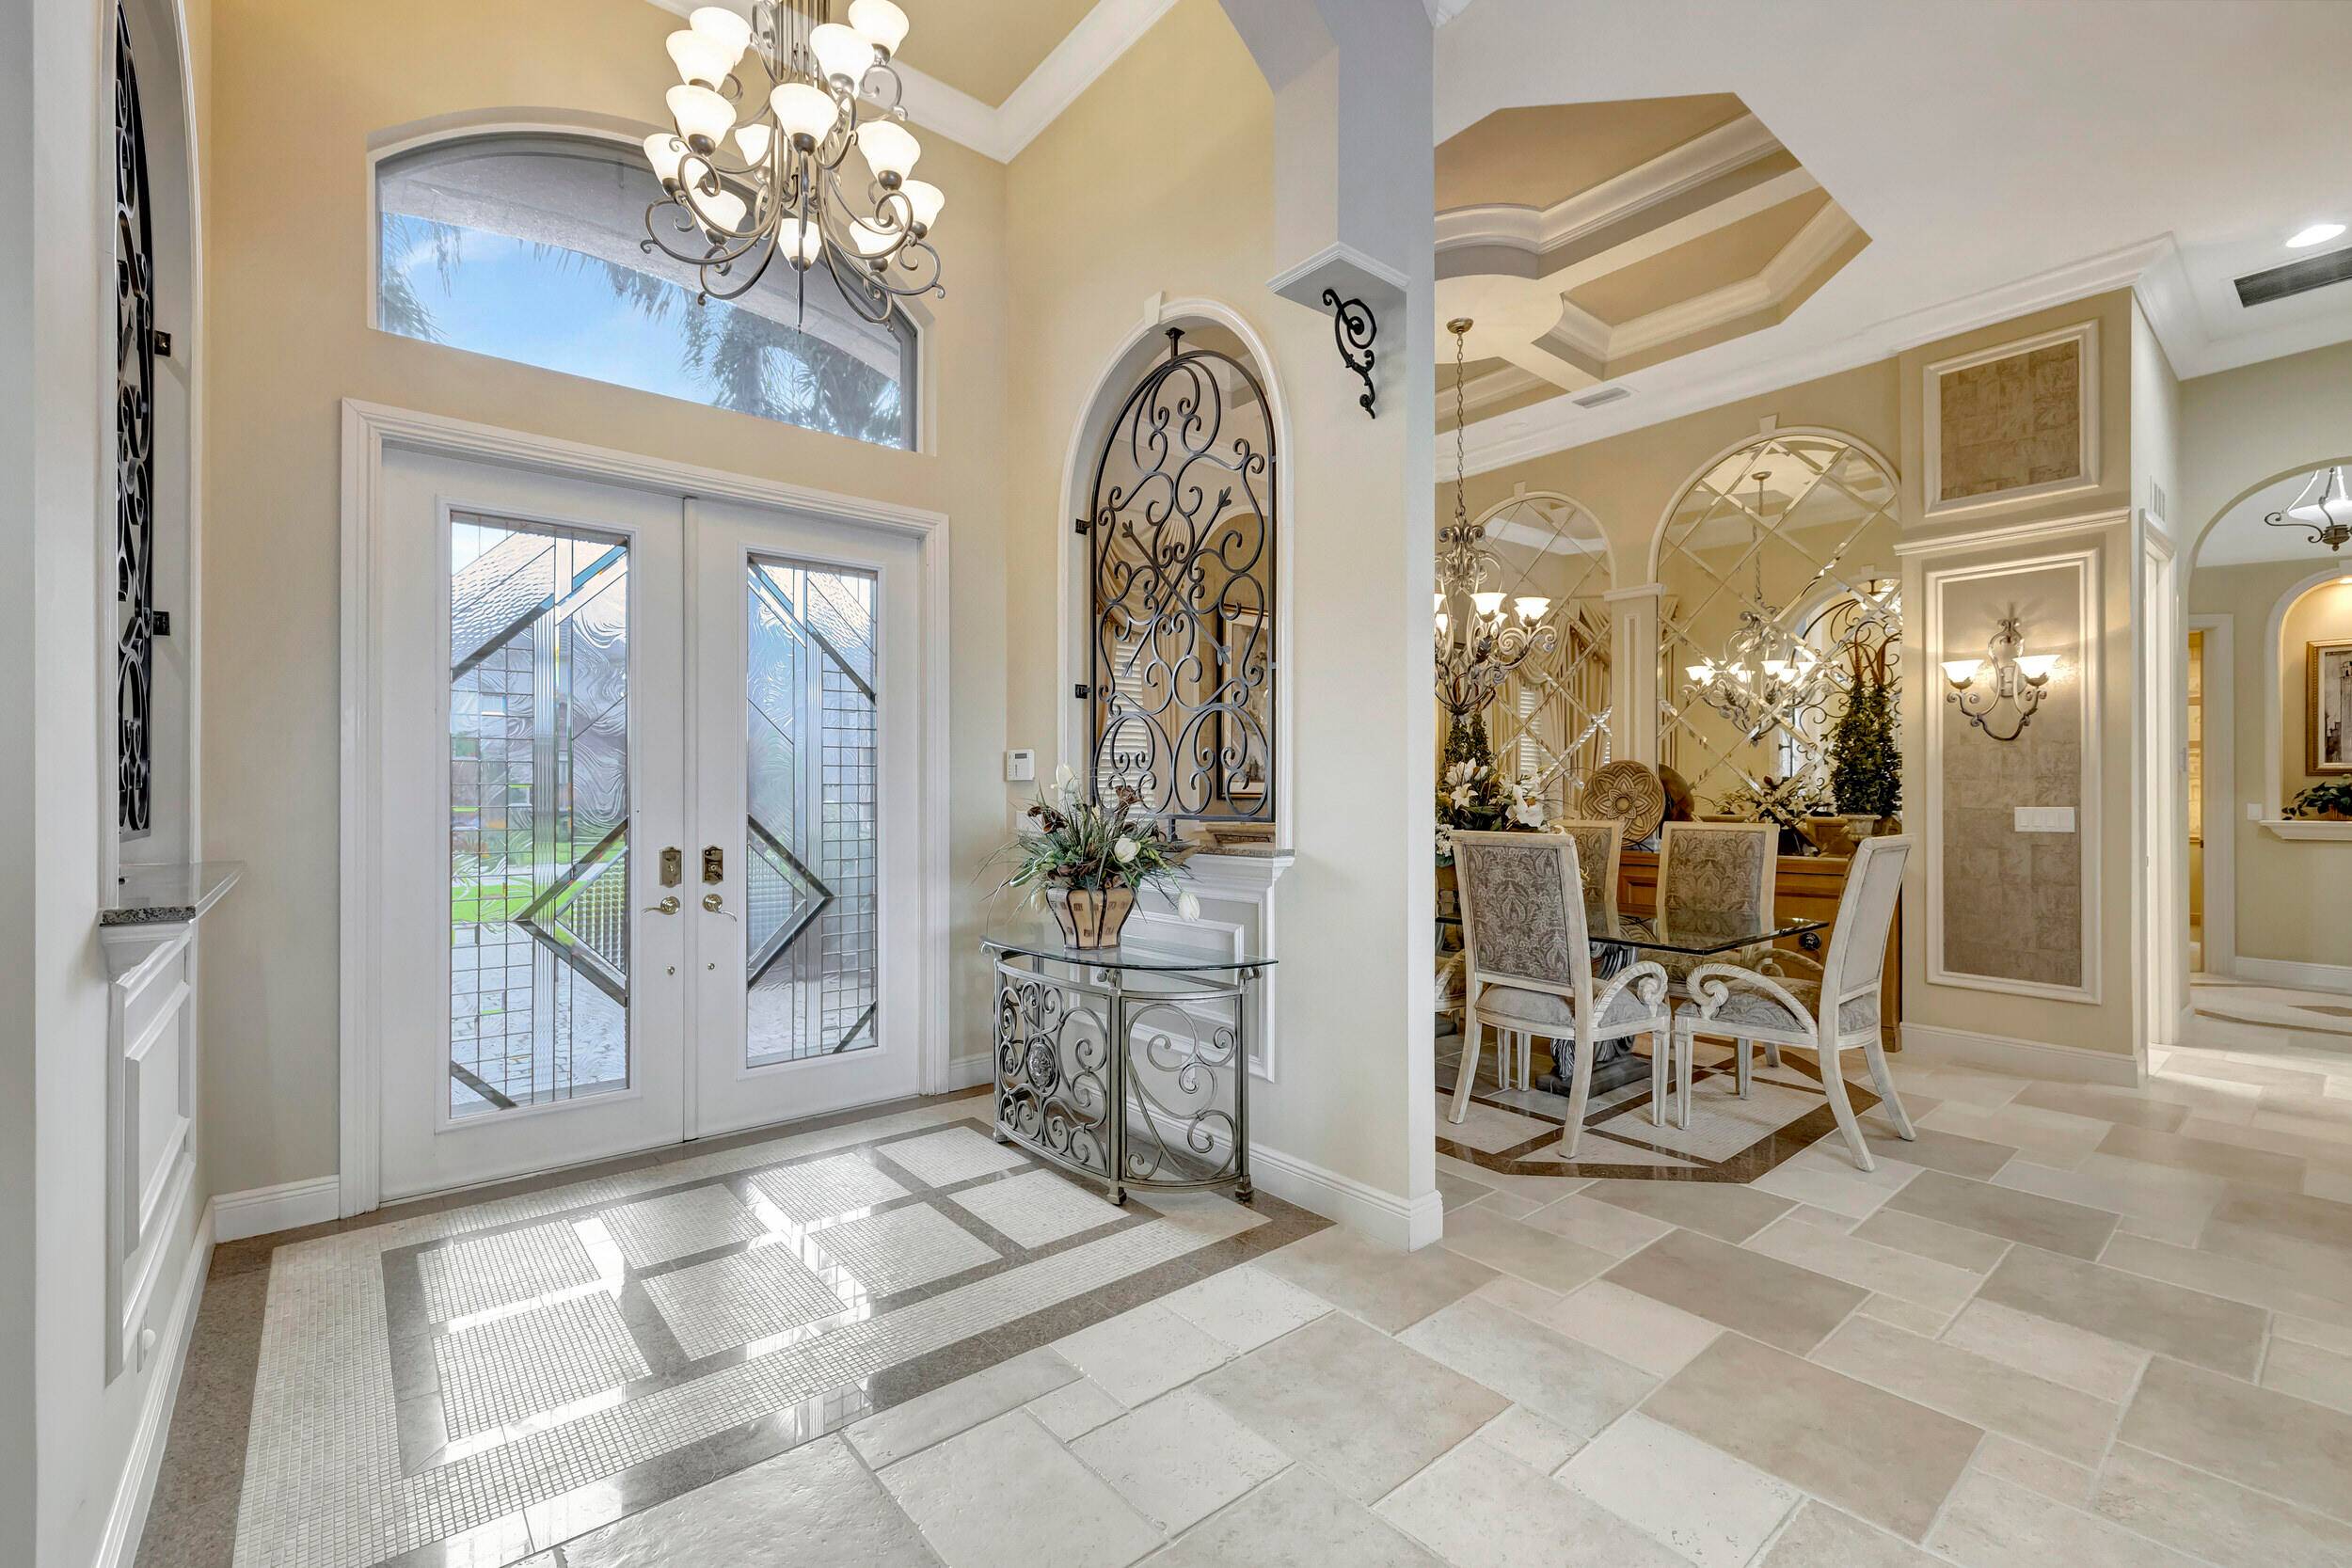 Welcome to the beautiful Provence section of Versailles of Wellington and to this former builder's model, professionally decorated, completely furnished, and barely lived in.